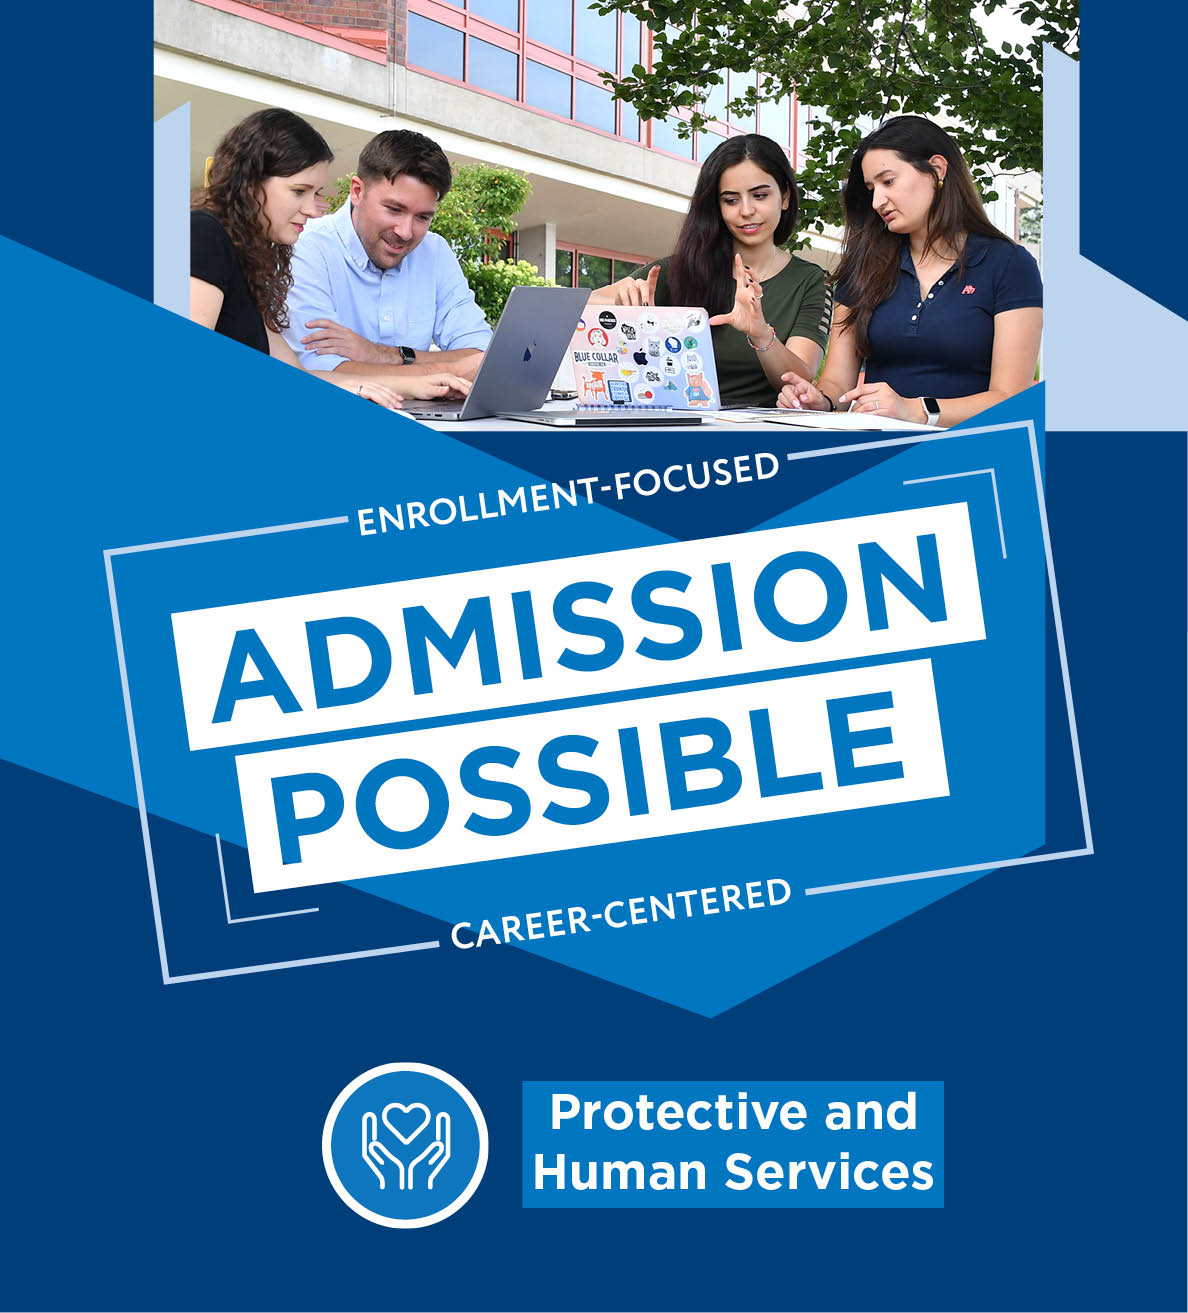 Admission Possible: Protective and Human Services